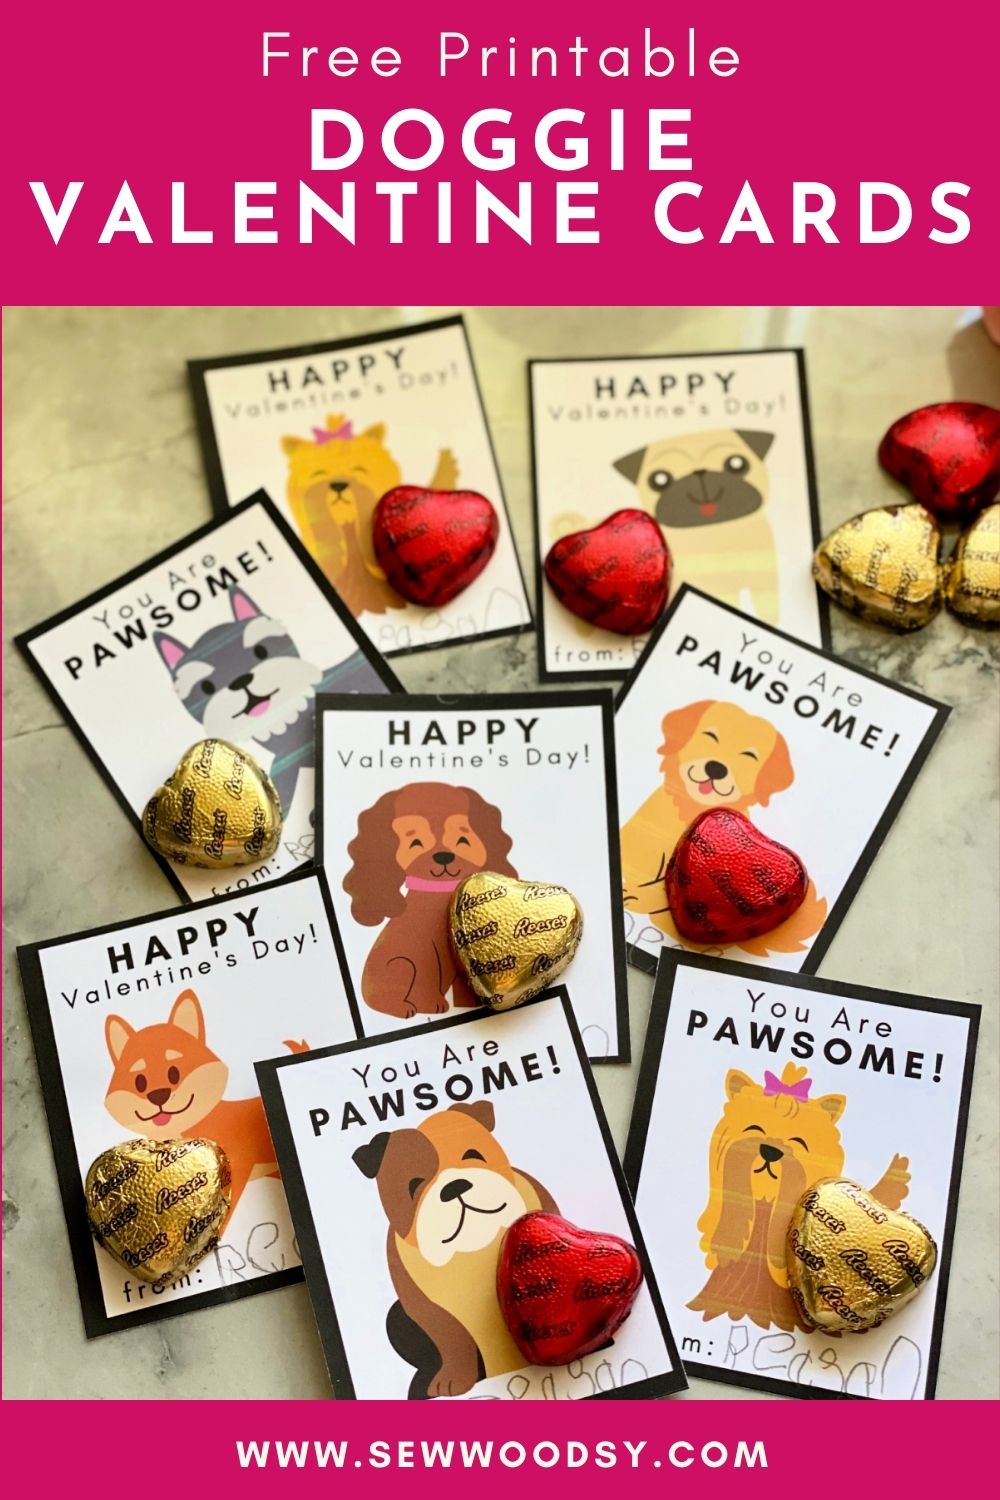 7 dog valentines with chocolate hearts with post title text on image for Pinterest.